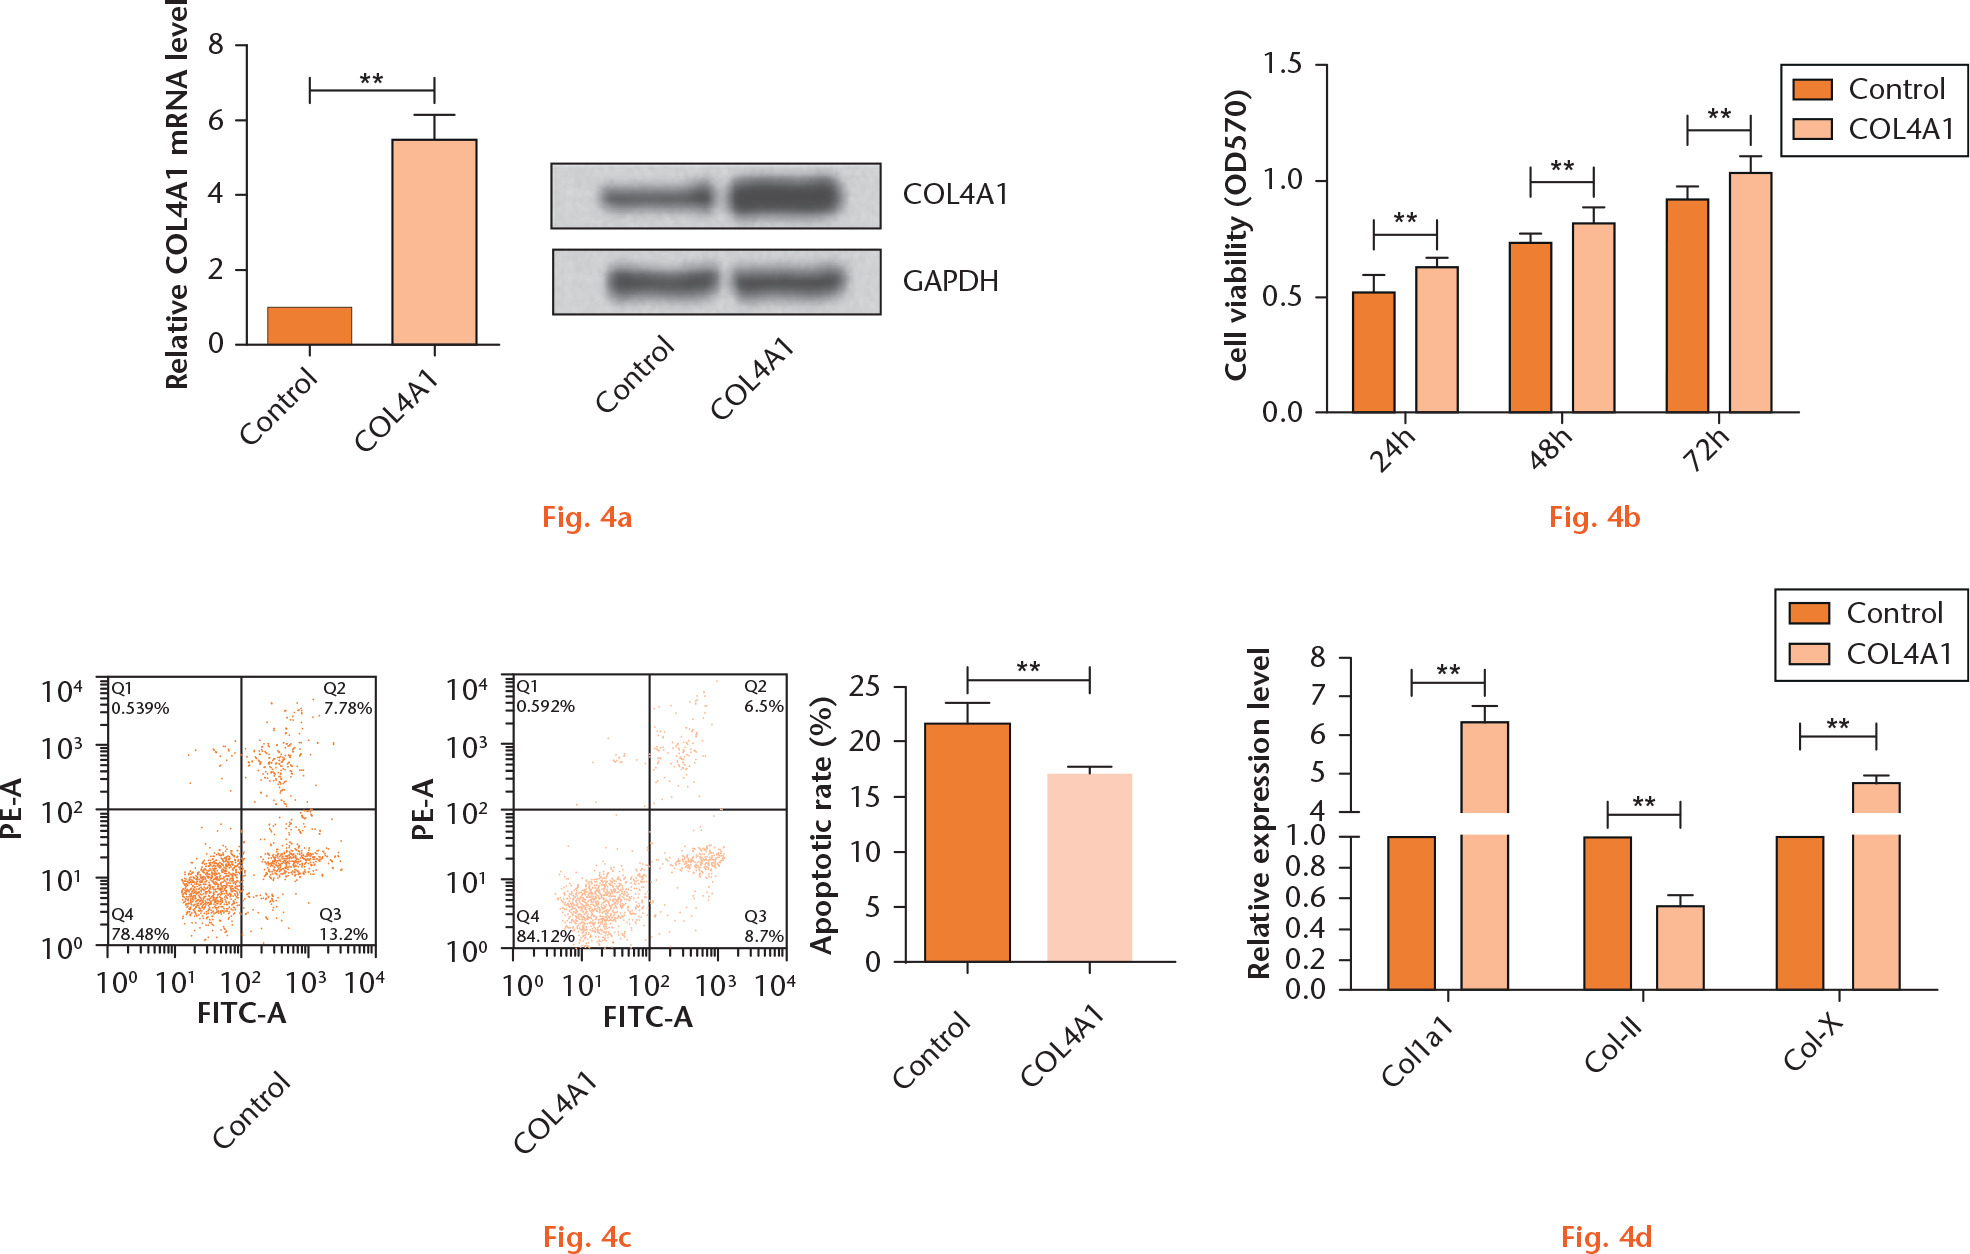  
            Overexpression of COL4A1 promotes cell viability, suppresses apoptosis, and changes collagen (COL) levels. a) Relative expression of COL4A1 after transfection with pcDNA3.1 (+)-COL4A1; b) effects of overexpression of COL4A1 on cell viability; c) effects of overexpression of COL4A1 on cell apoptosis; d) effects of overexpression of COL4A1 on the expression of COL1A1, COL-II, and COL-X. *p < 0.05, **p < 0.01 compared with the control group.
          